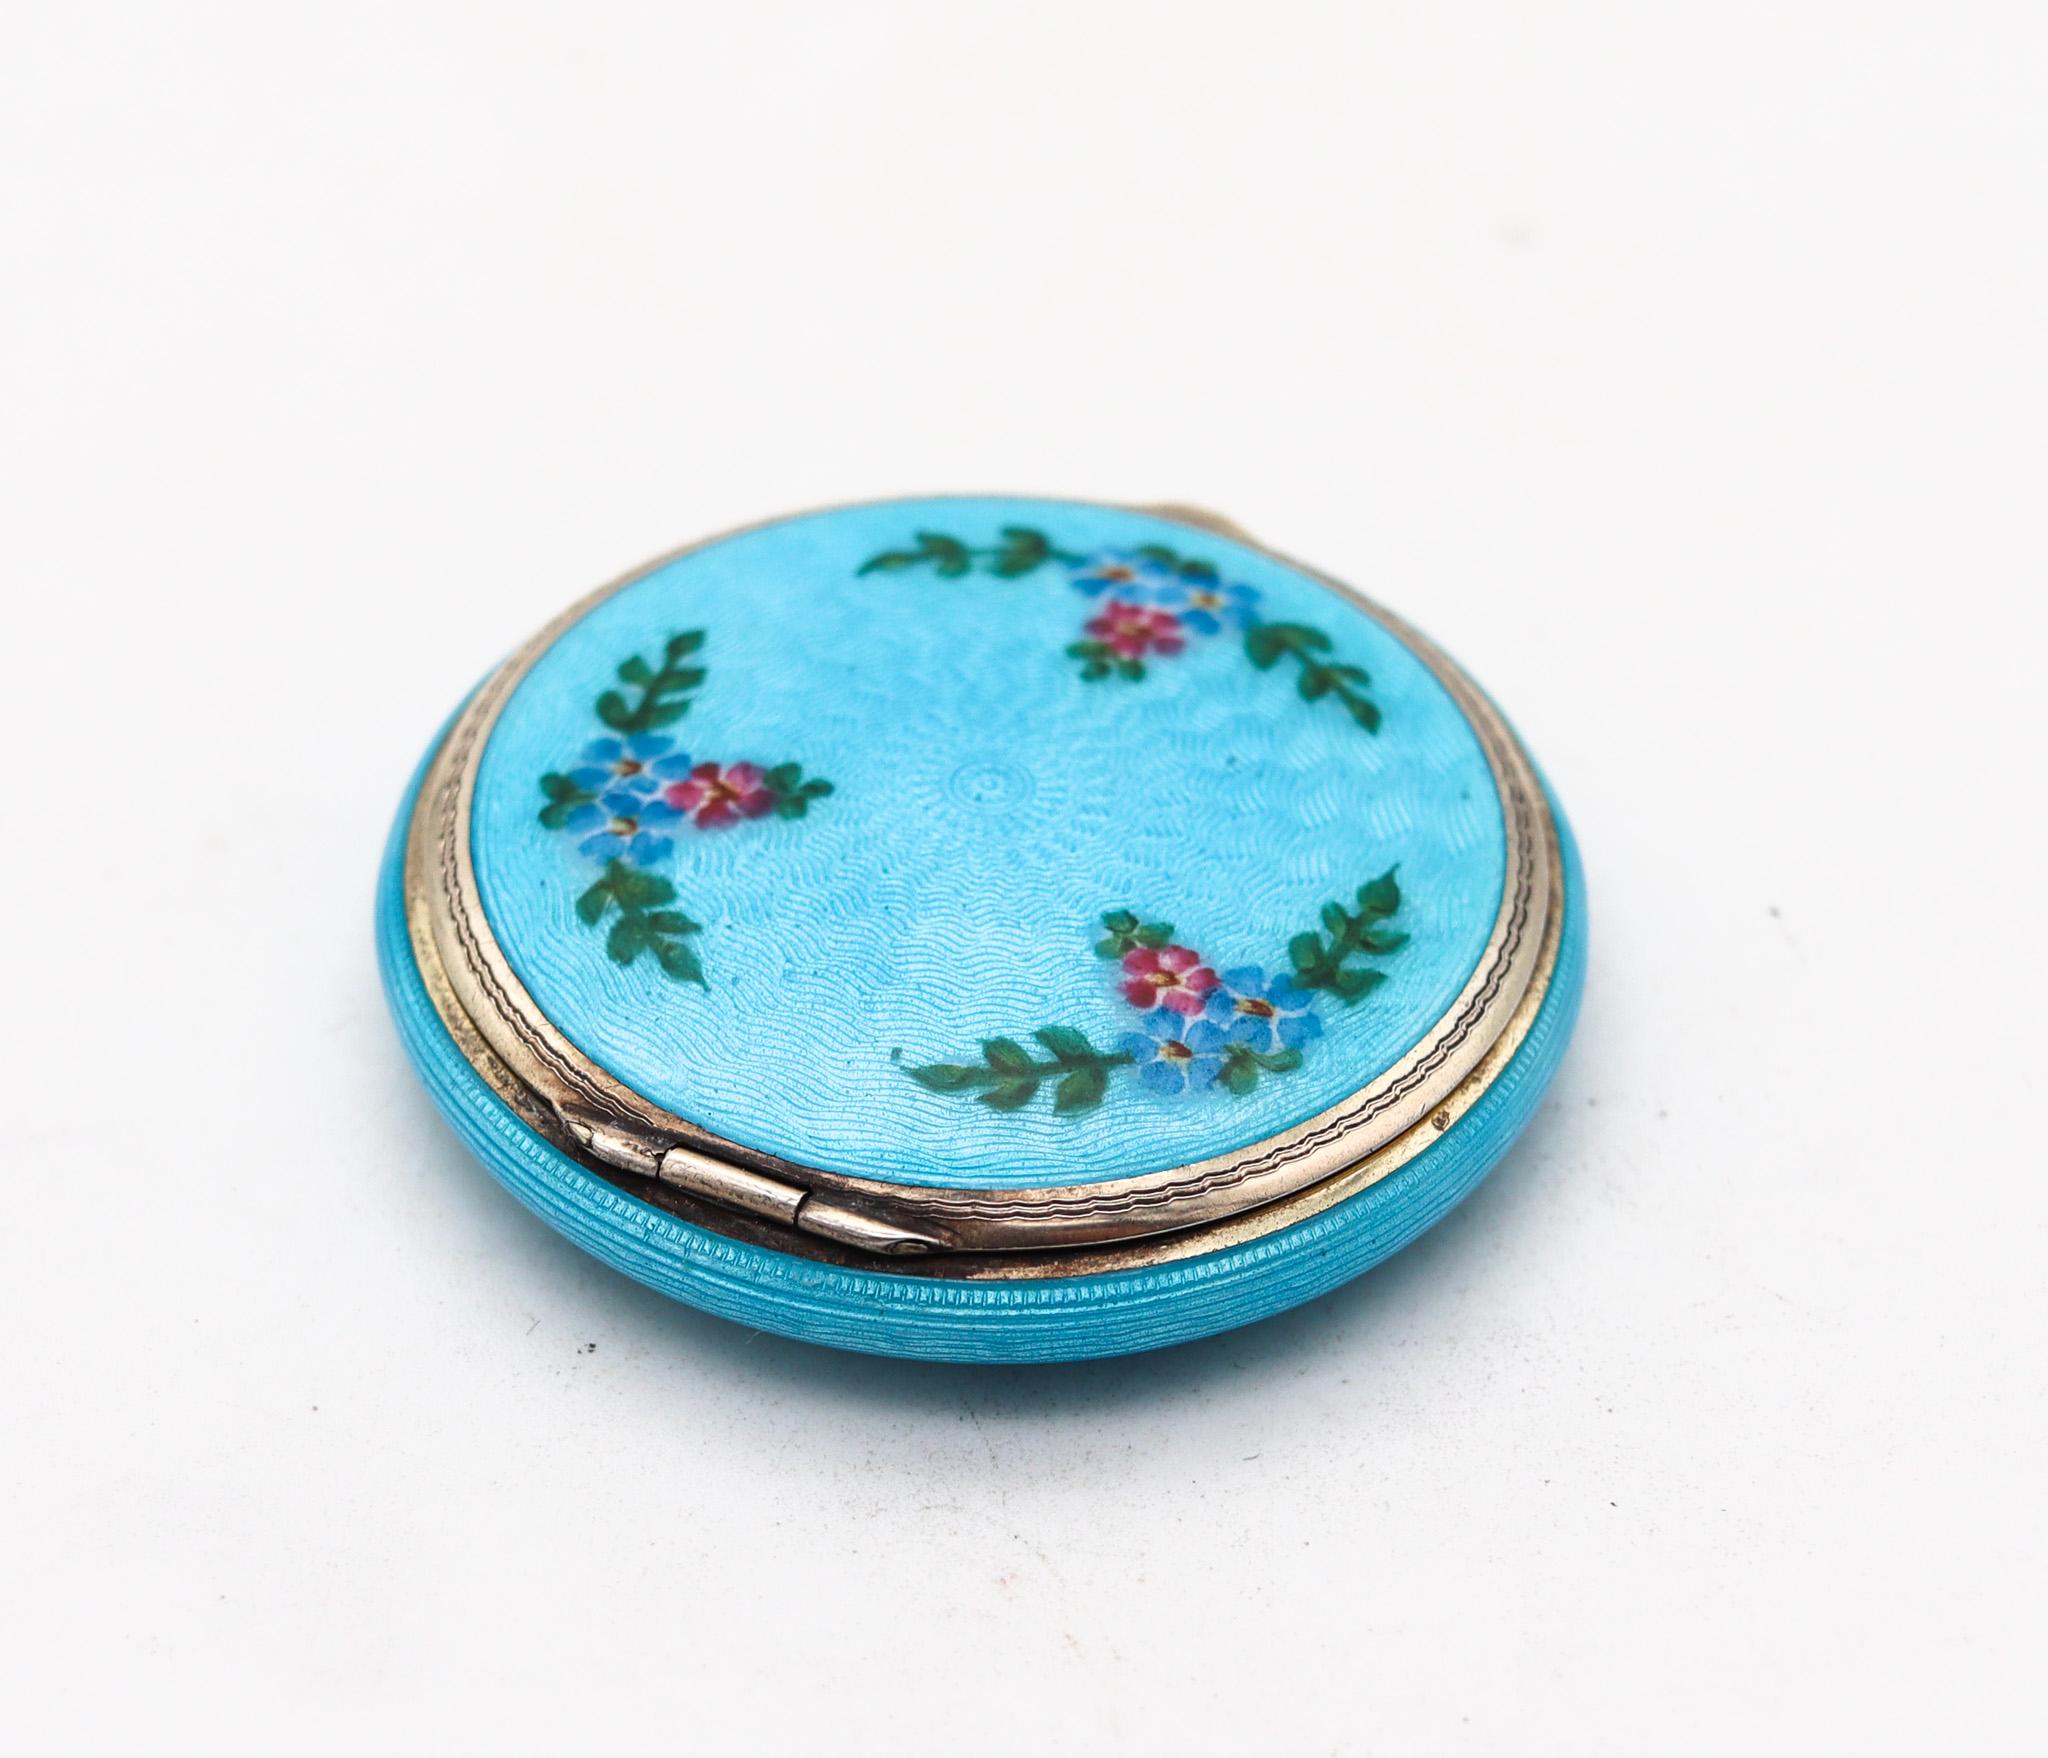 An art deco guilloche enamel box made by Foster & Bailey.

Beautiful enamel round box, created during the art deco period, back in the 1925. This beautiful antique piece was carefully crafted at the workshops of Foster & Bailey in solid .925/.999